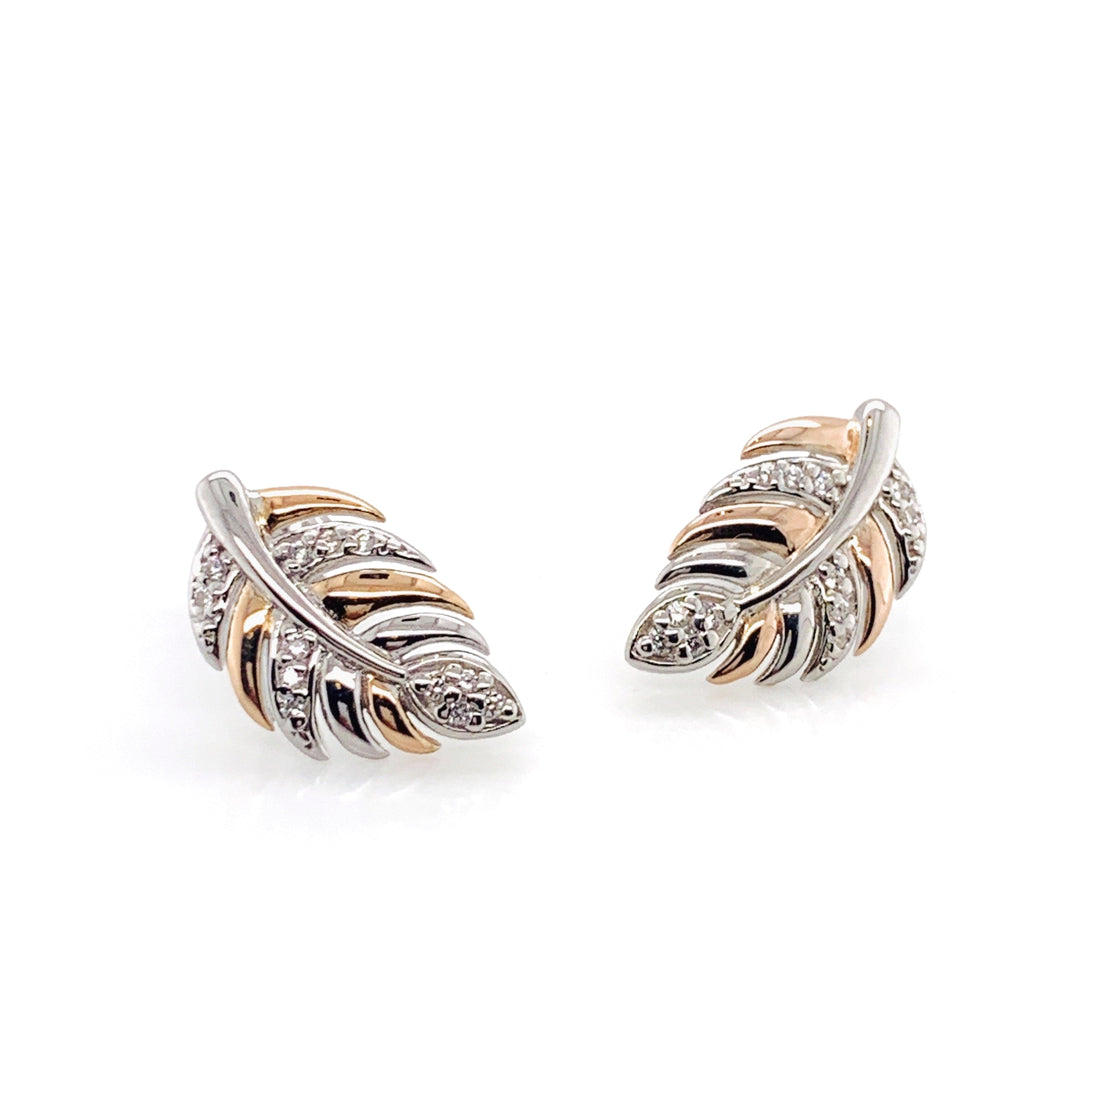 Silver and Rose Gold Plated Leaf Earrings